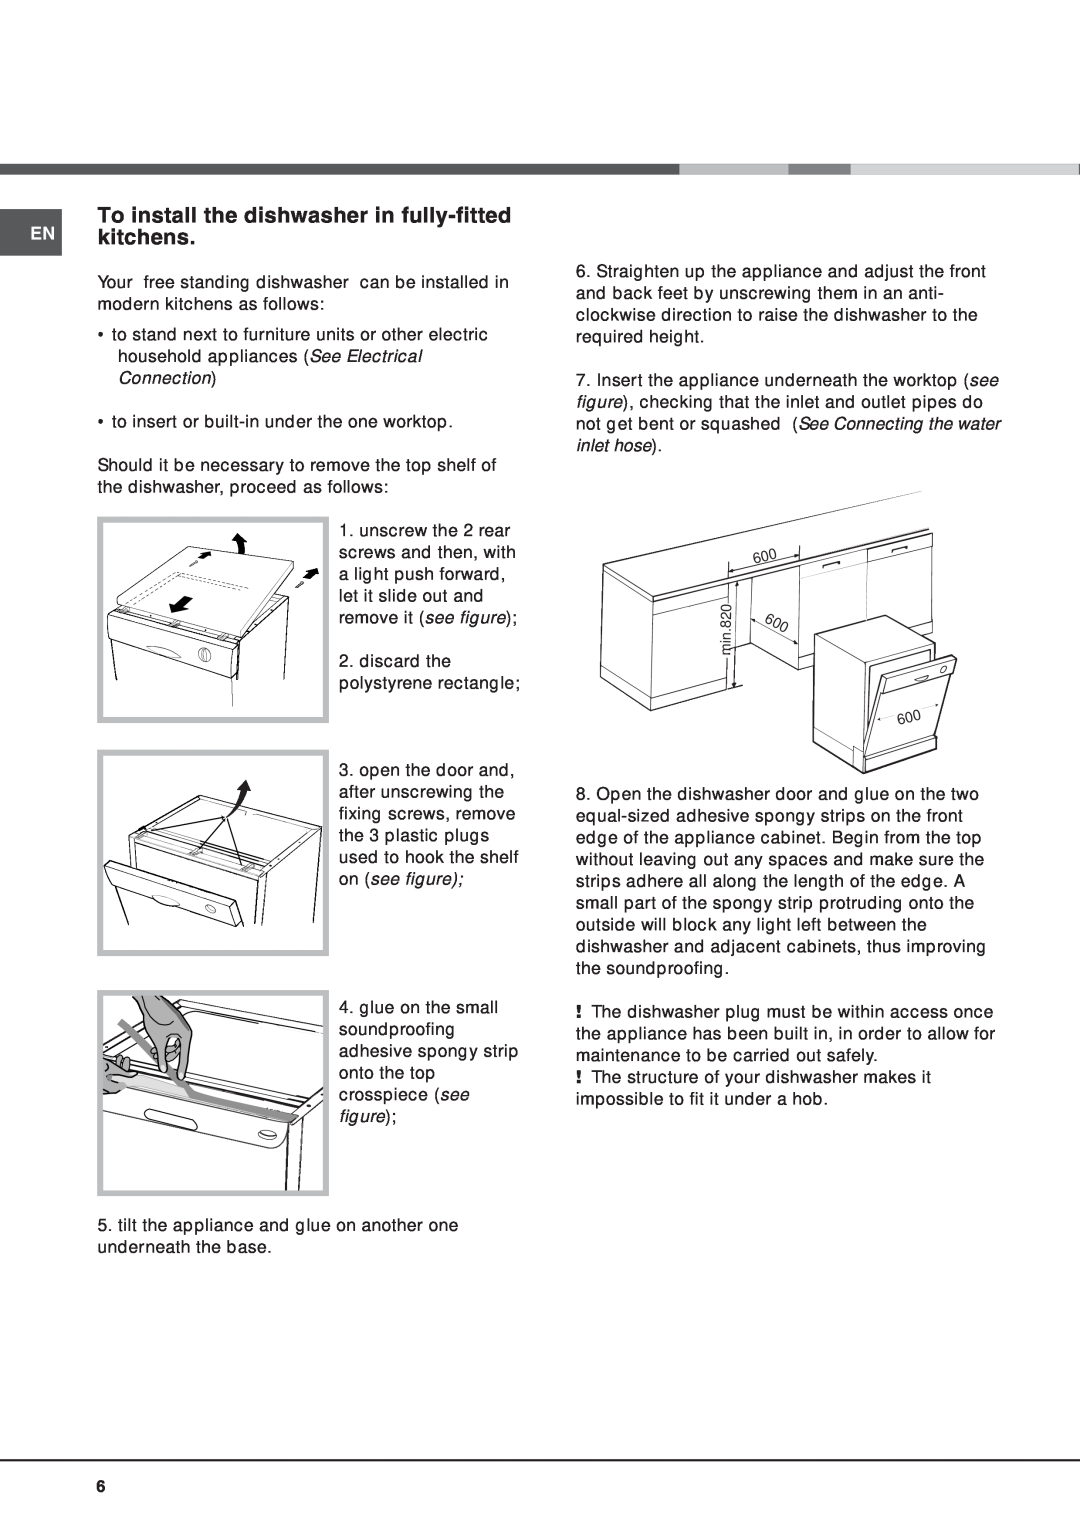 Hotpoint FDW 75, FDW 70 manual to insert or built-inunder the one worktop 